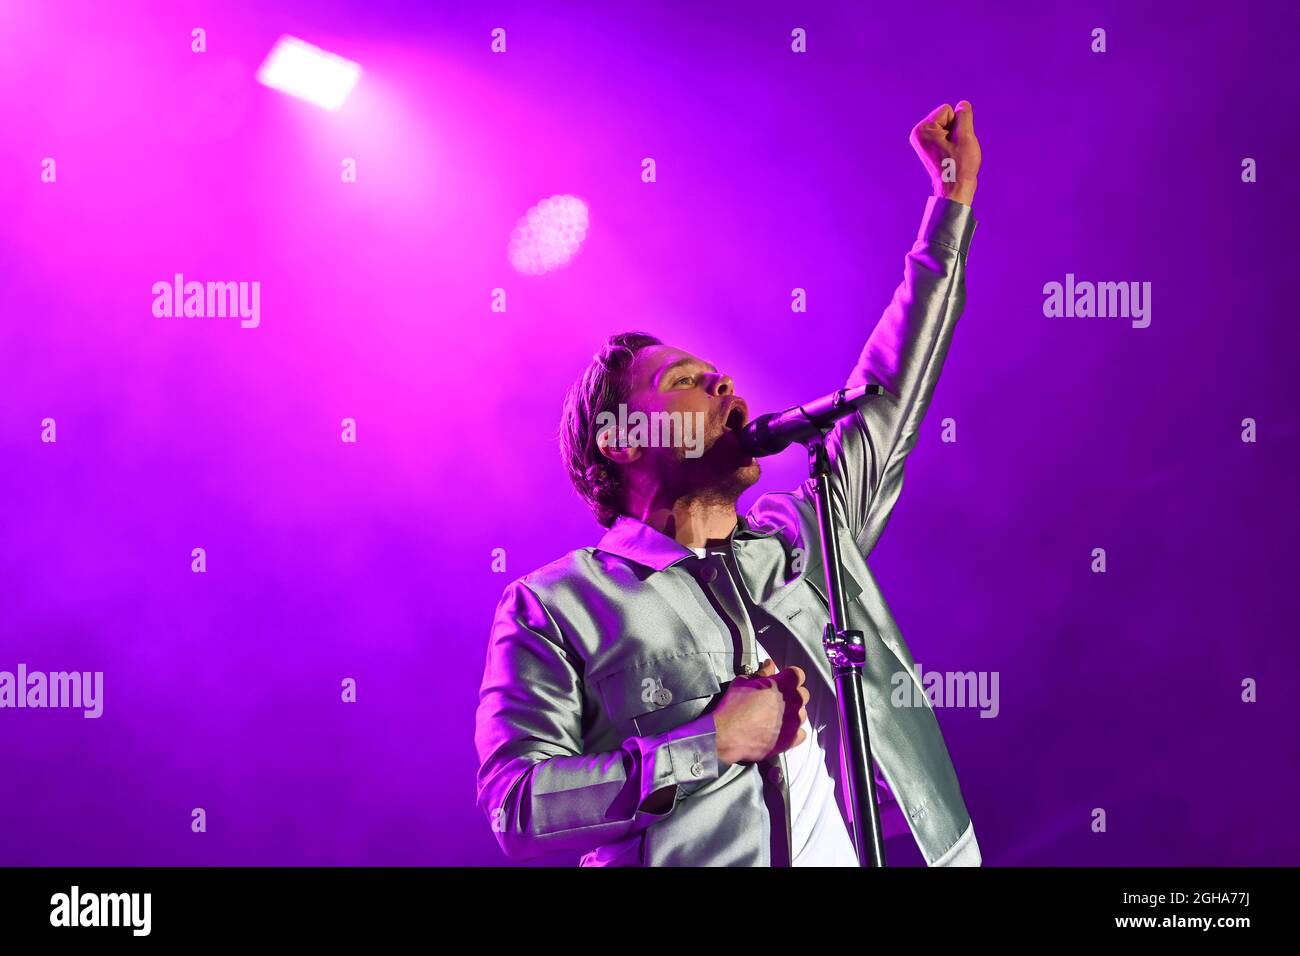 Olly Murs singer on concert stage Telford in September 7th 2021 Stock Photo